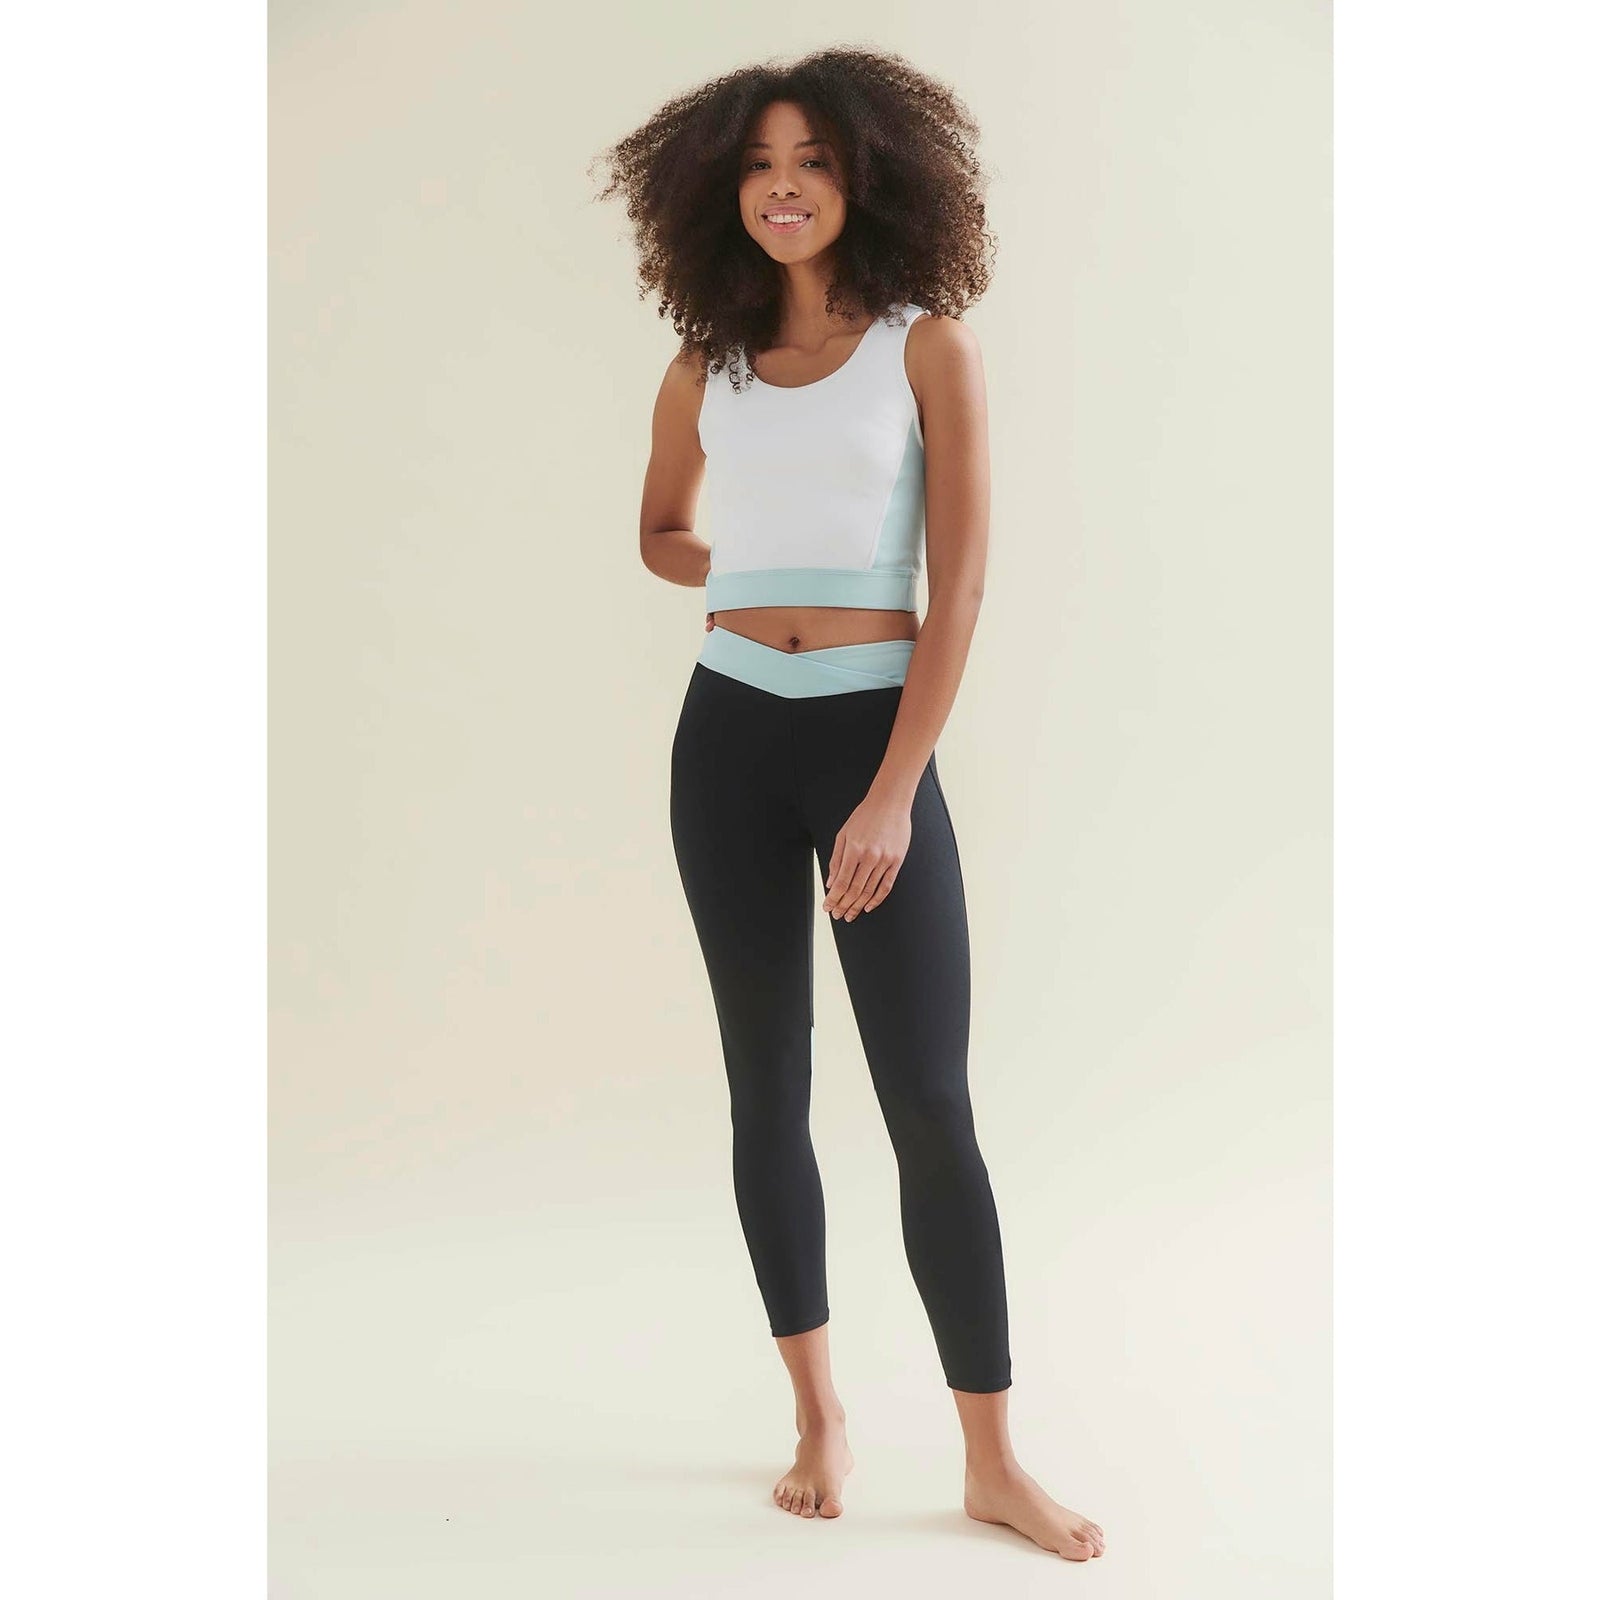 THE GYM PEOPLE Womens' Yoga Pants High Waist Dominican Republic